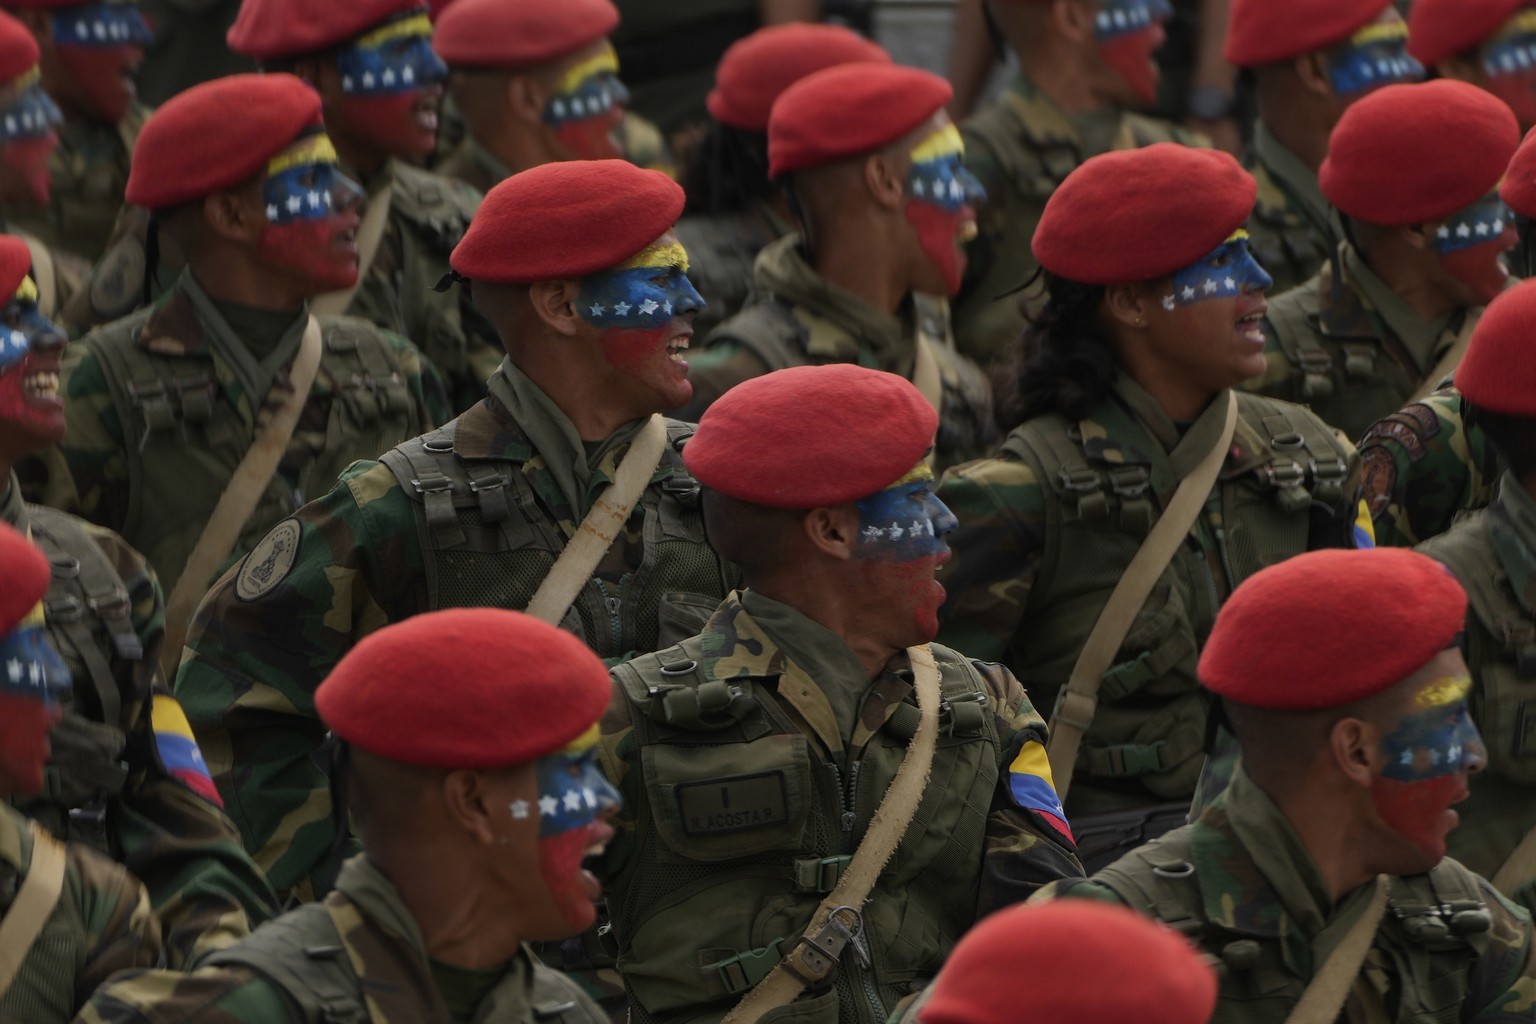 Soldiers march during the Independence Day military parade in Caracas, Venezuela, Wednesday, July 5, 2023. Venezuela is marking 212 years of independence from Spain. (AP Photo/Ariana Cubillos)